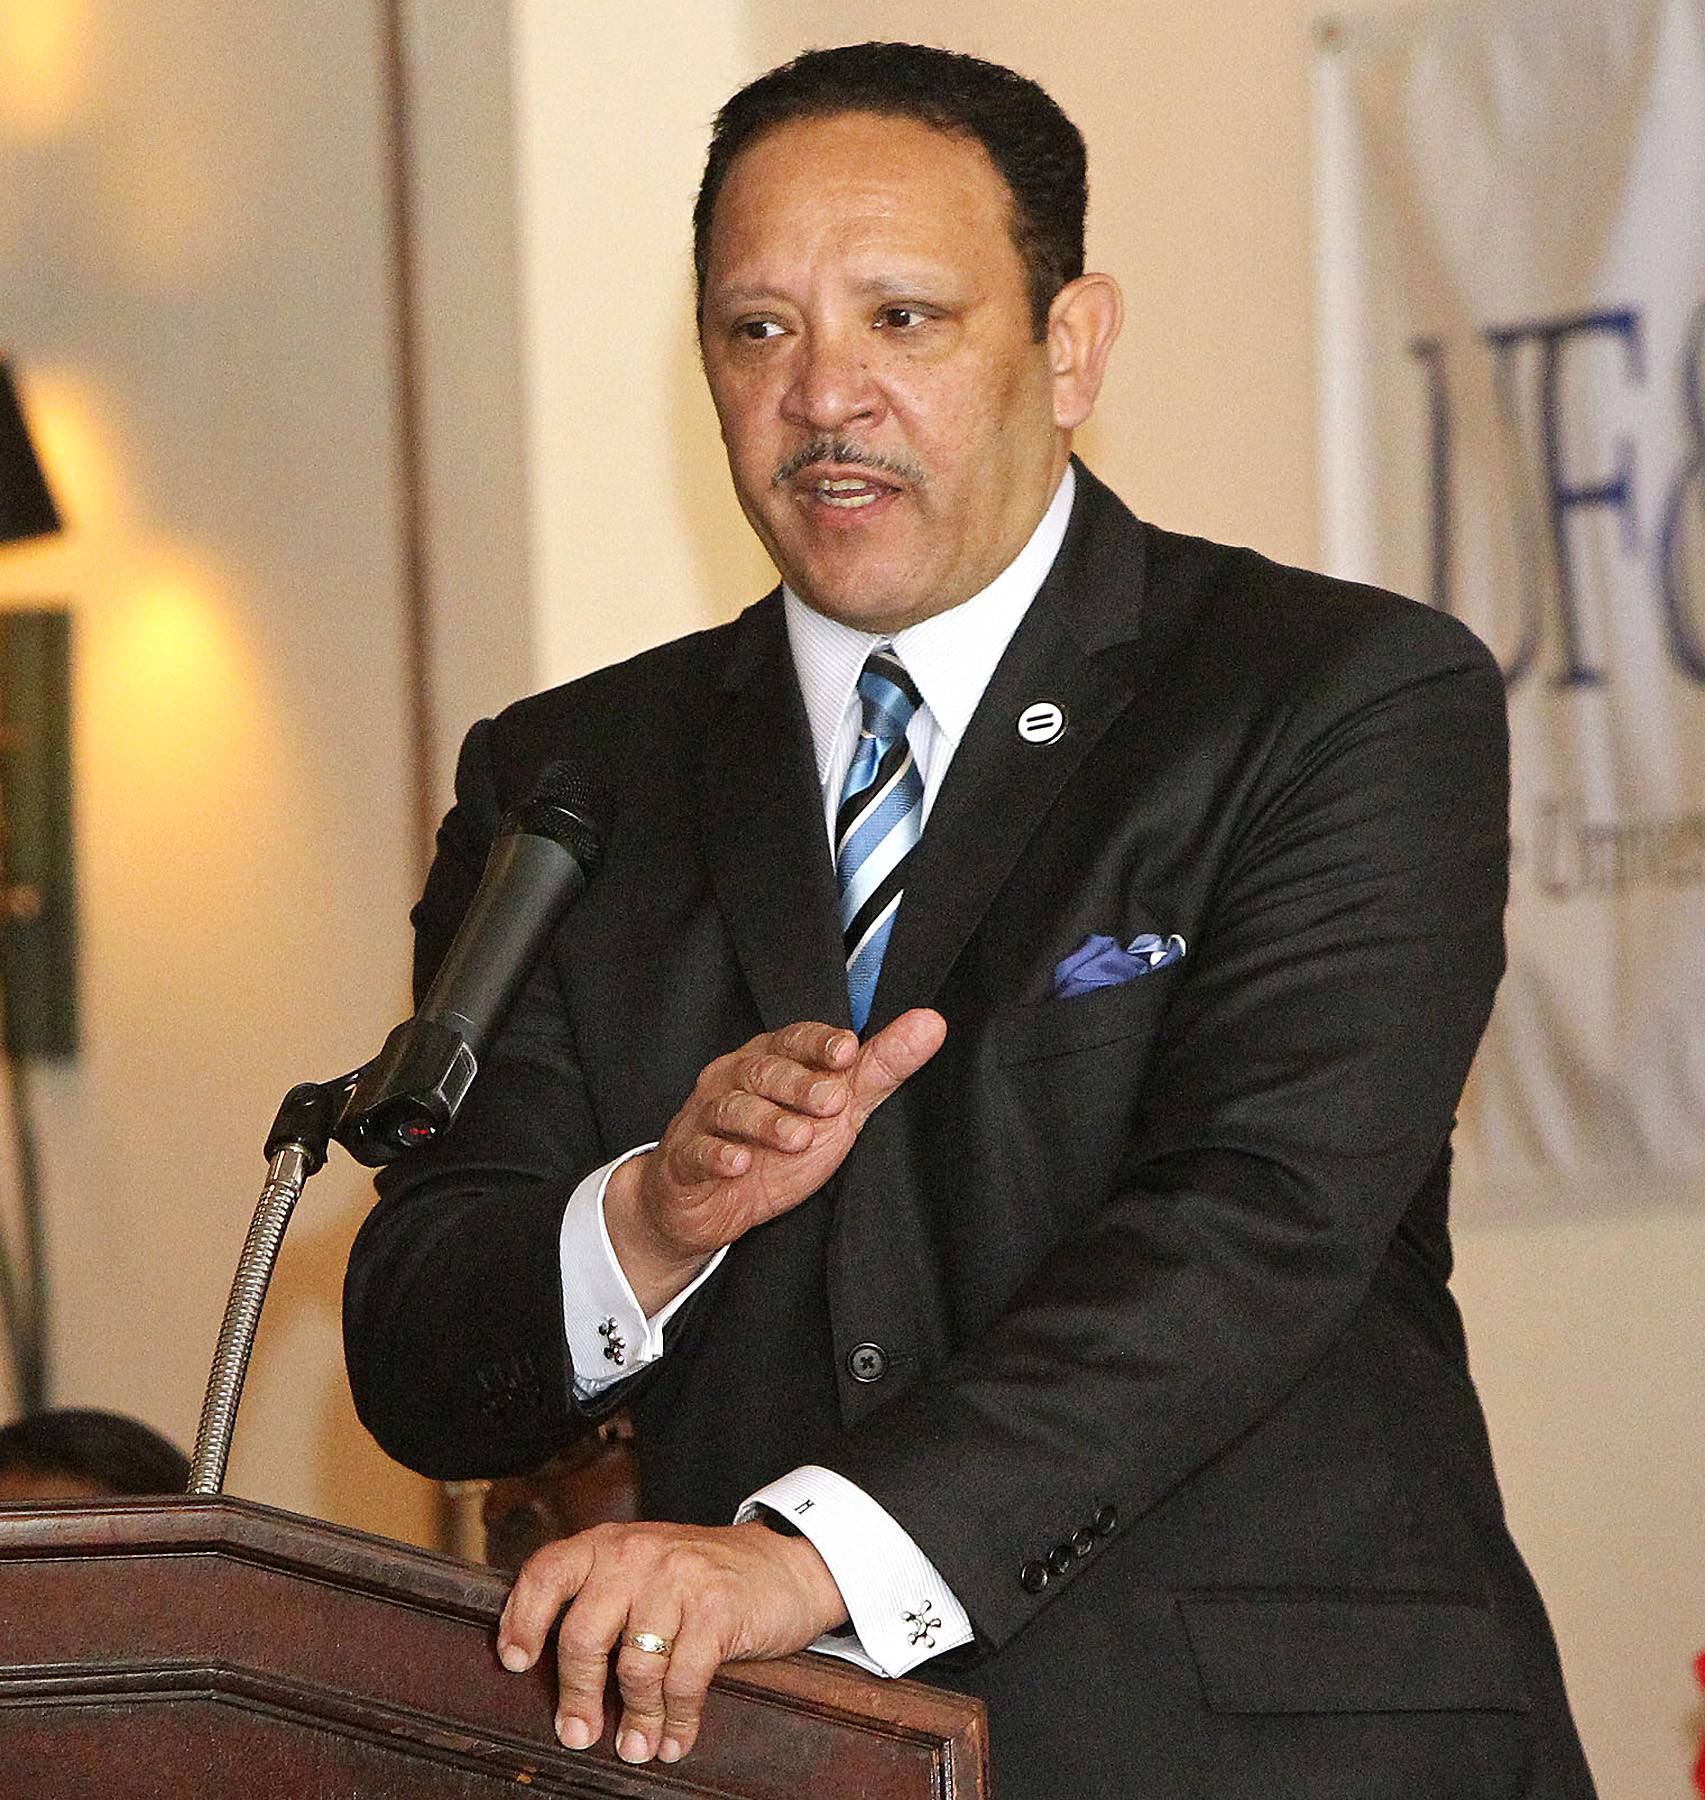 Former New Orleans Mayor Calls for Action to Help Ailing HBCUs